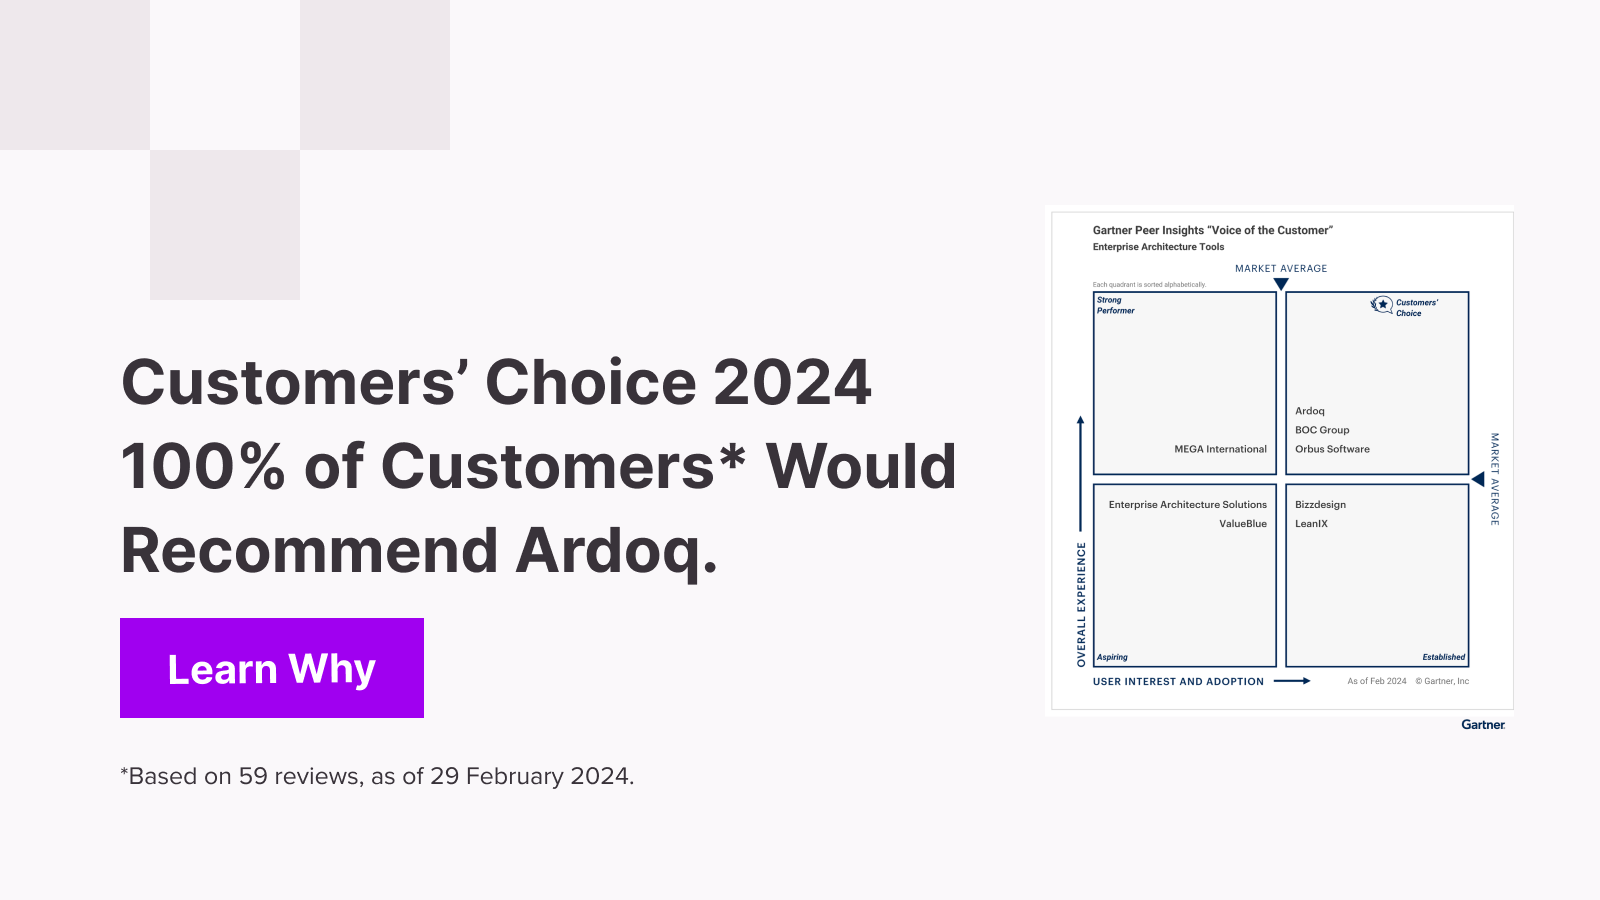 Want to Learn About Ardoq? Hear From Our Customers With The Confidence of Gartner® Peer Insights™